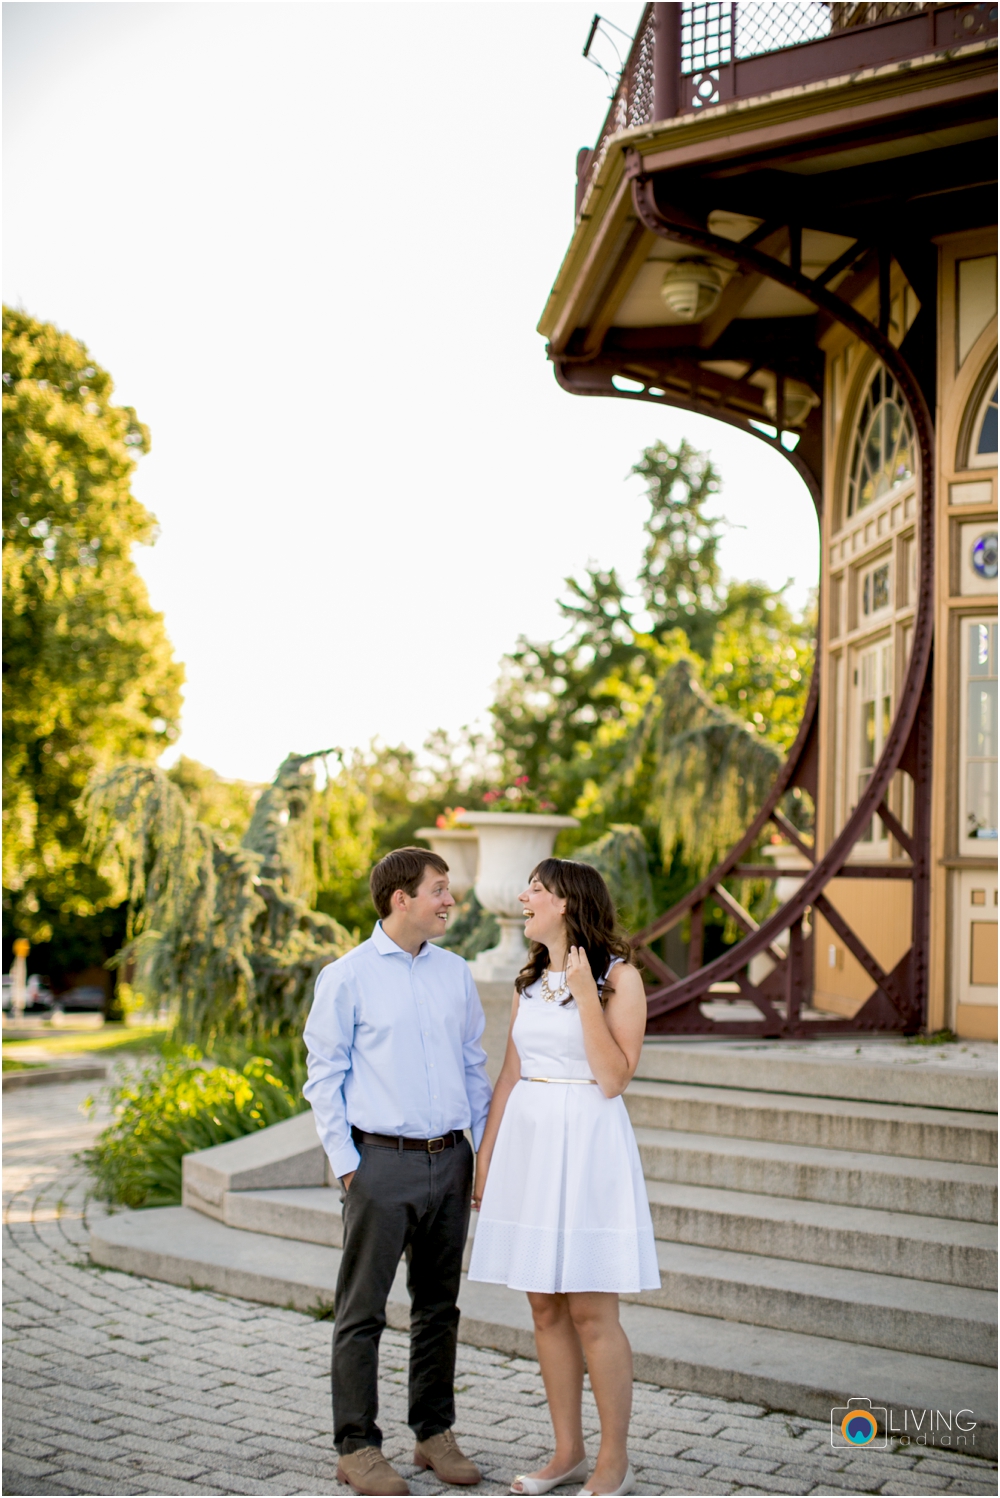 eva-dave-engaged-patterson-park-baltimore-downtown-living-radiant-photography-photos_0008.jpg